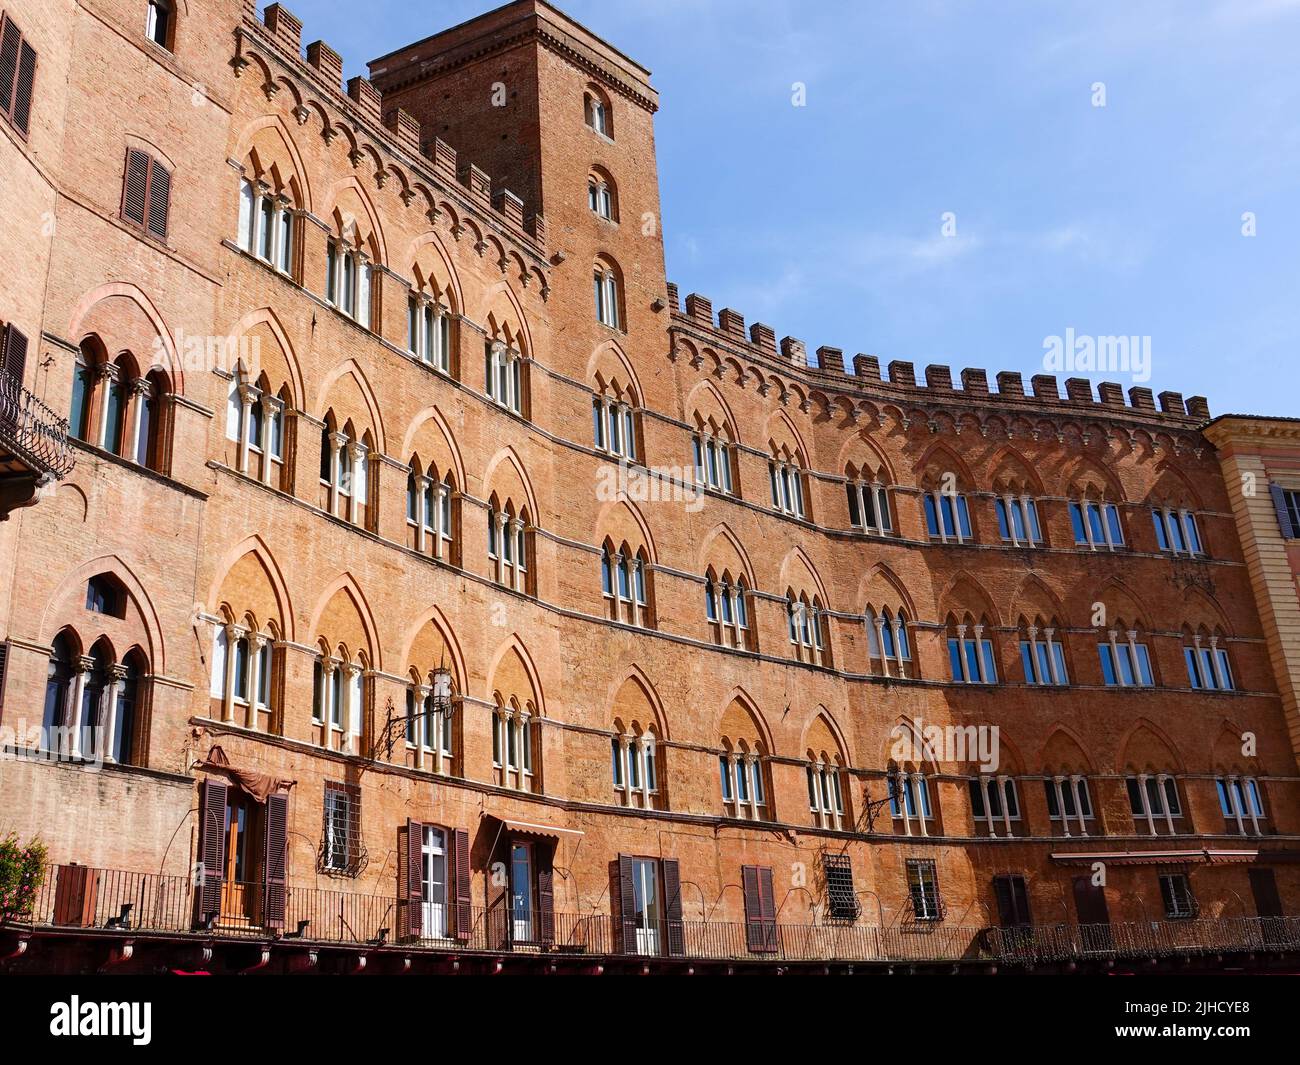 Red brick facade on buildings in the Piazza del Campo, Siena, Italy, located in the heart of Tuscany. Stock Photo